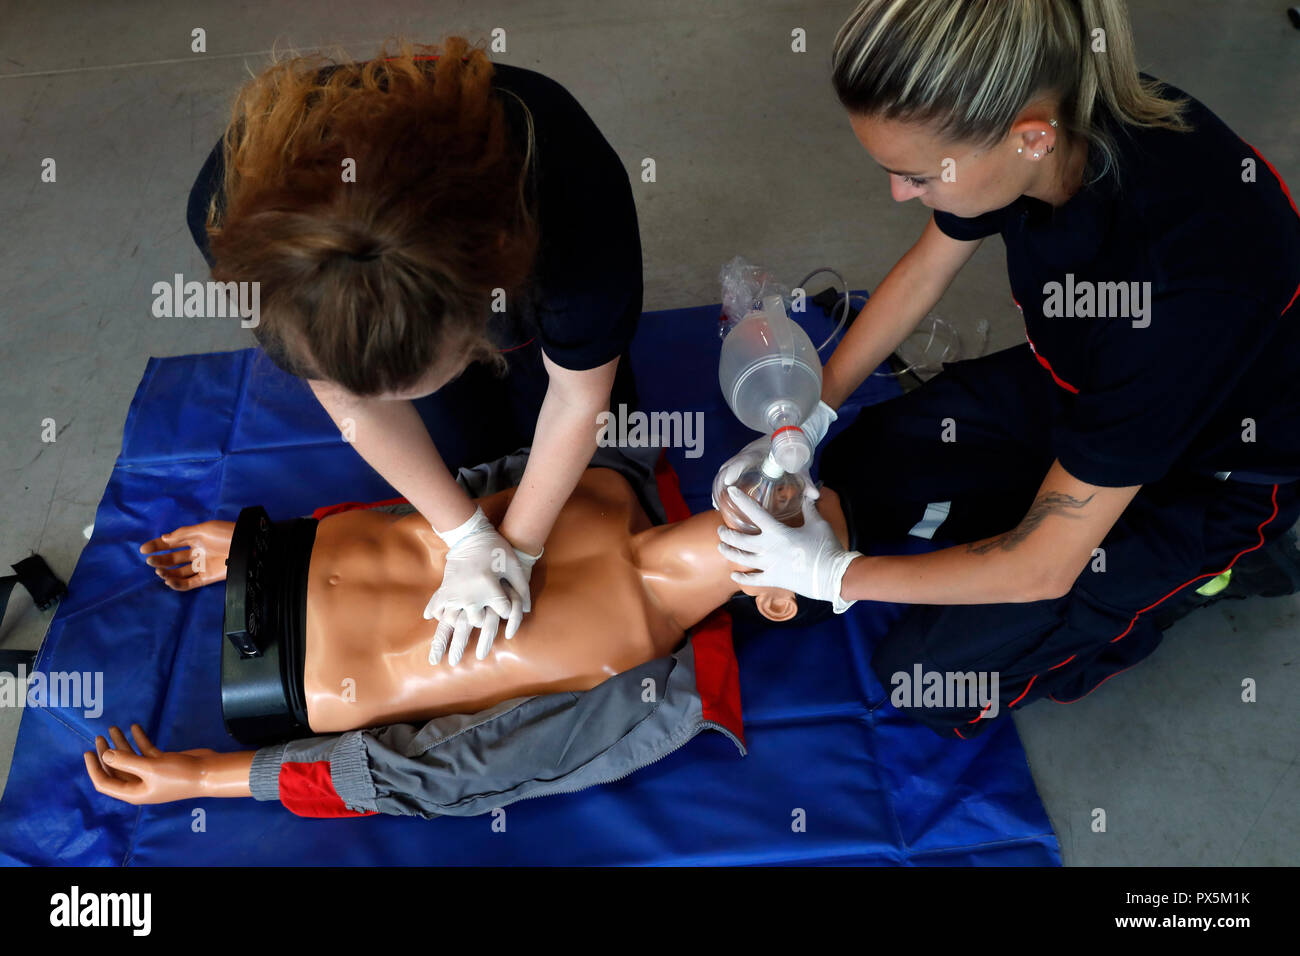 Life-saving first aid on a model.  Training session exercise.  Heart massage.  France. Stock Photo